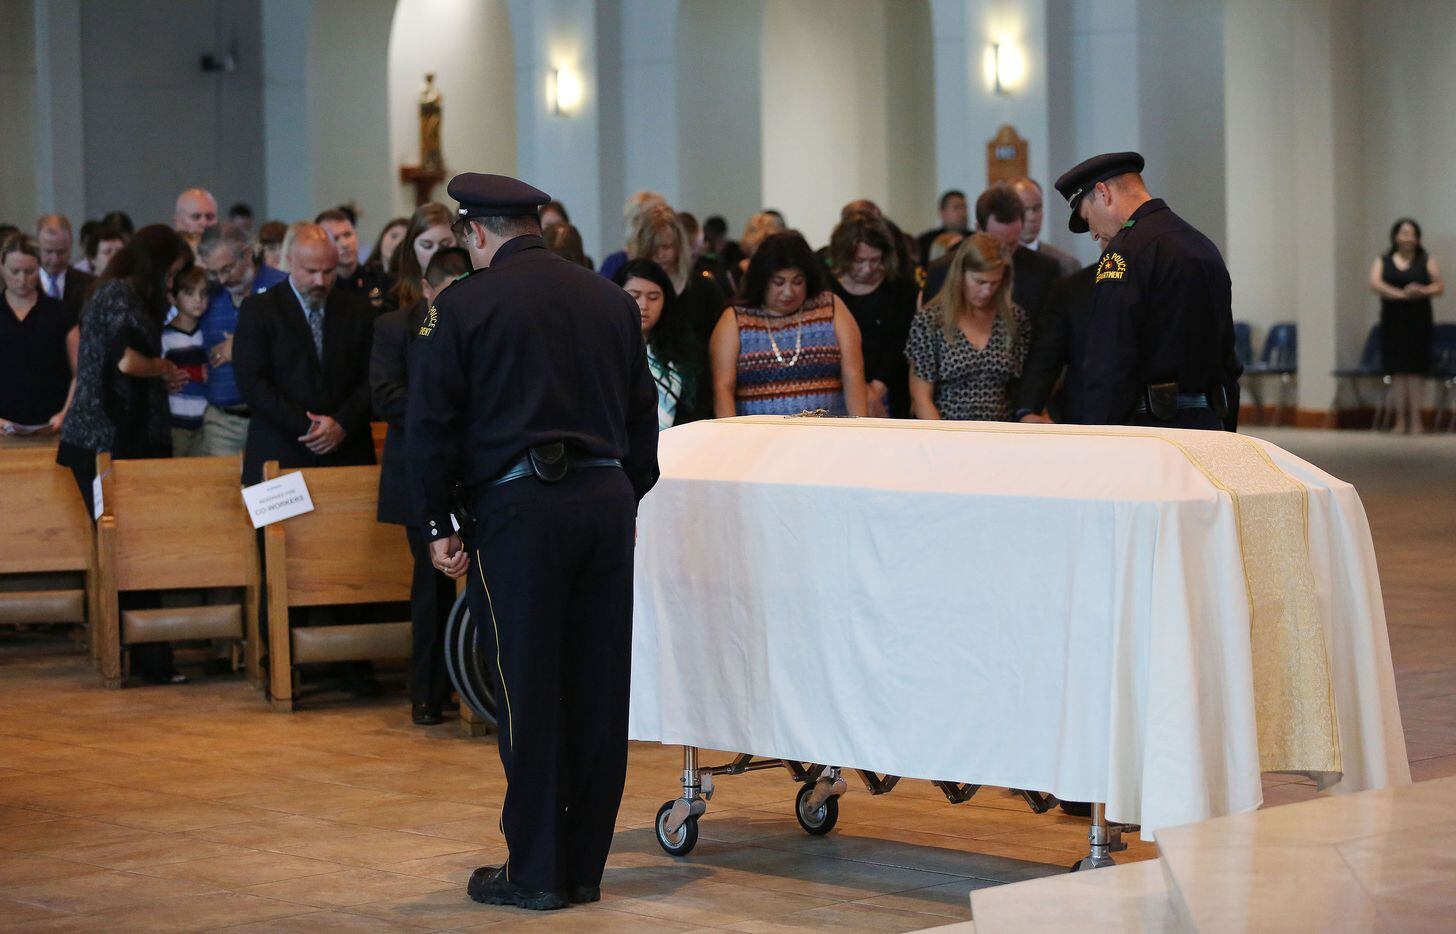 Dallas police officers stand by the casket of Dallas police sergeant Michael Smith during the funeral.